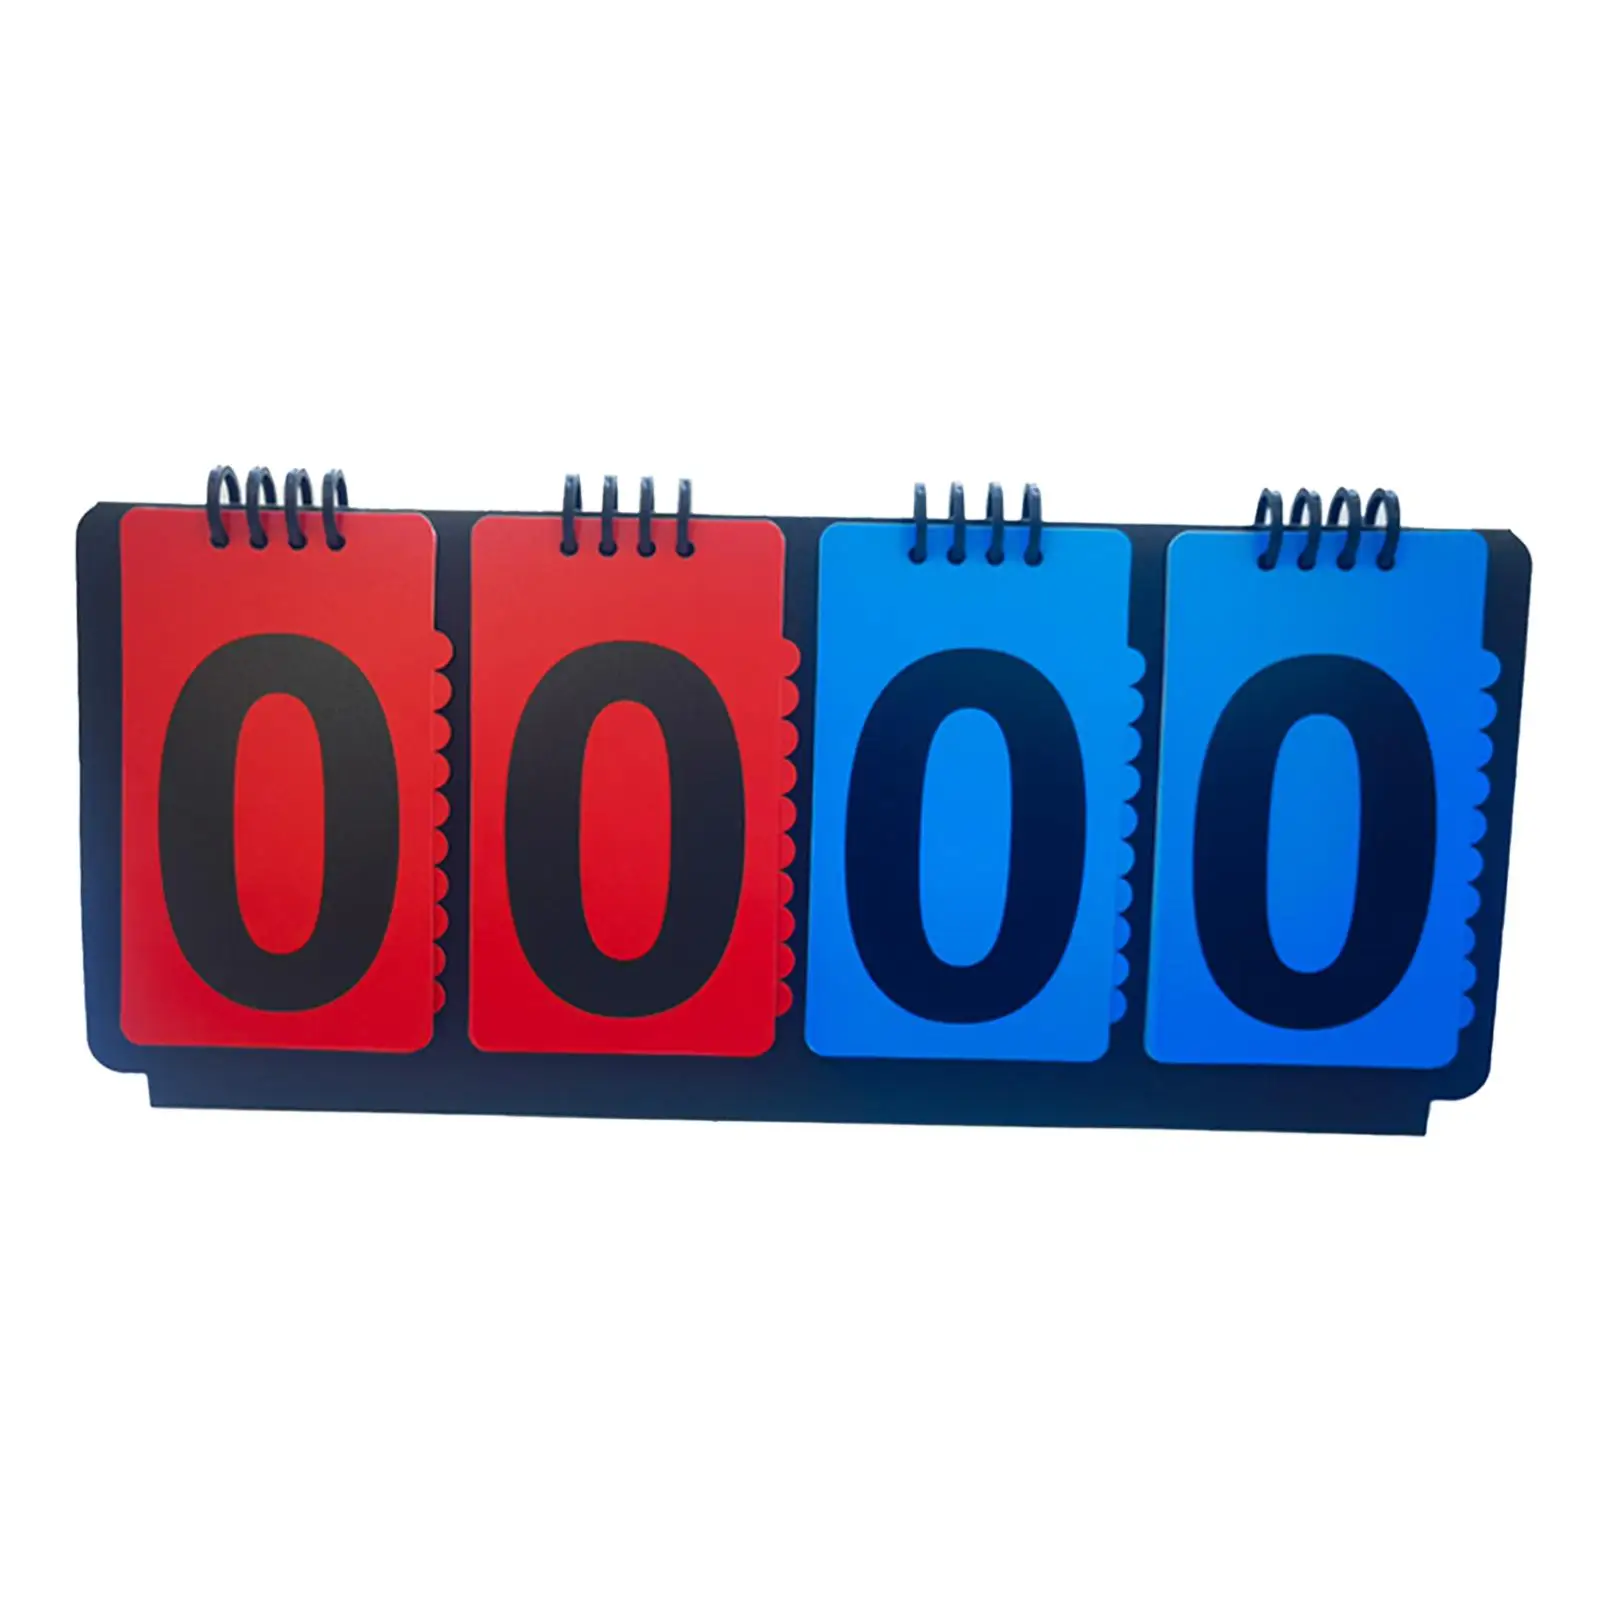 Table Score Flippers Flip Number Score Board for Games Basketball Volleyball